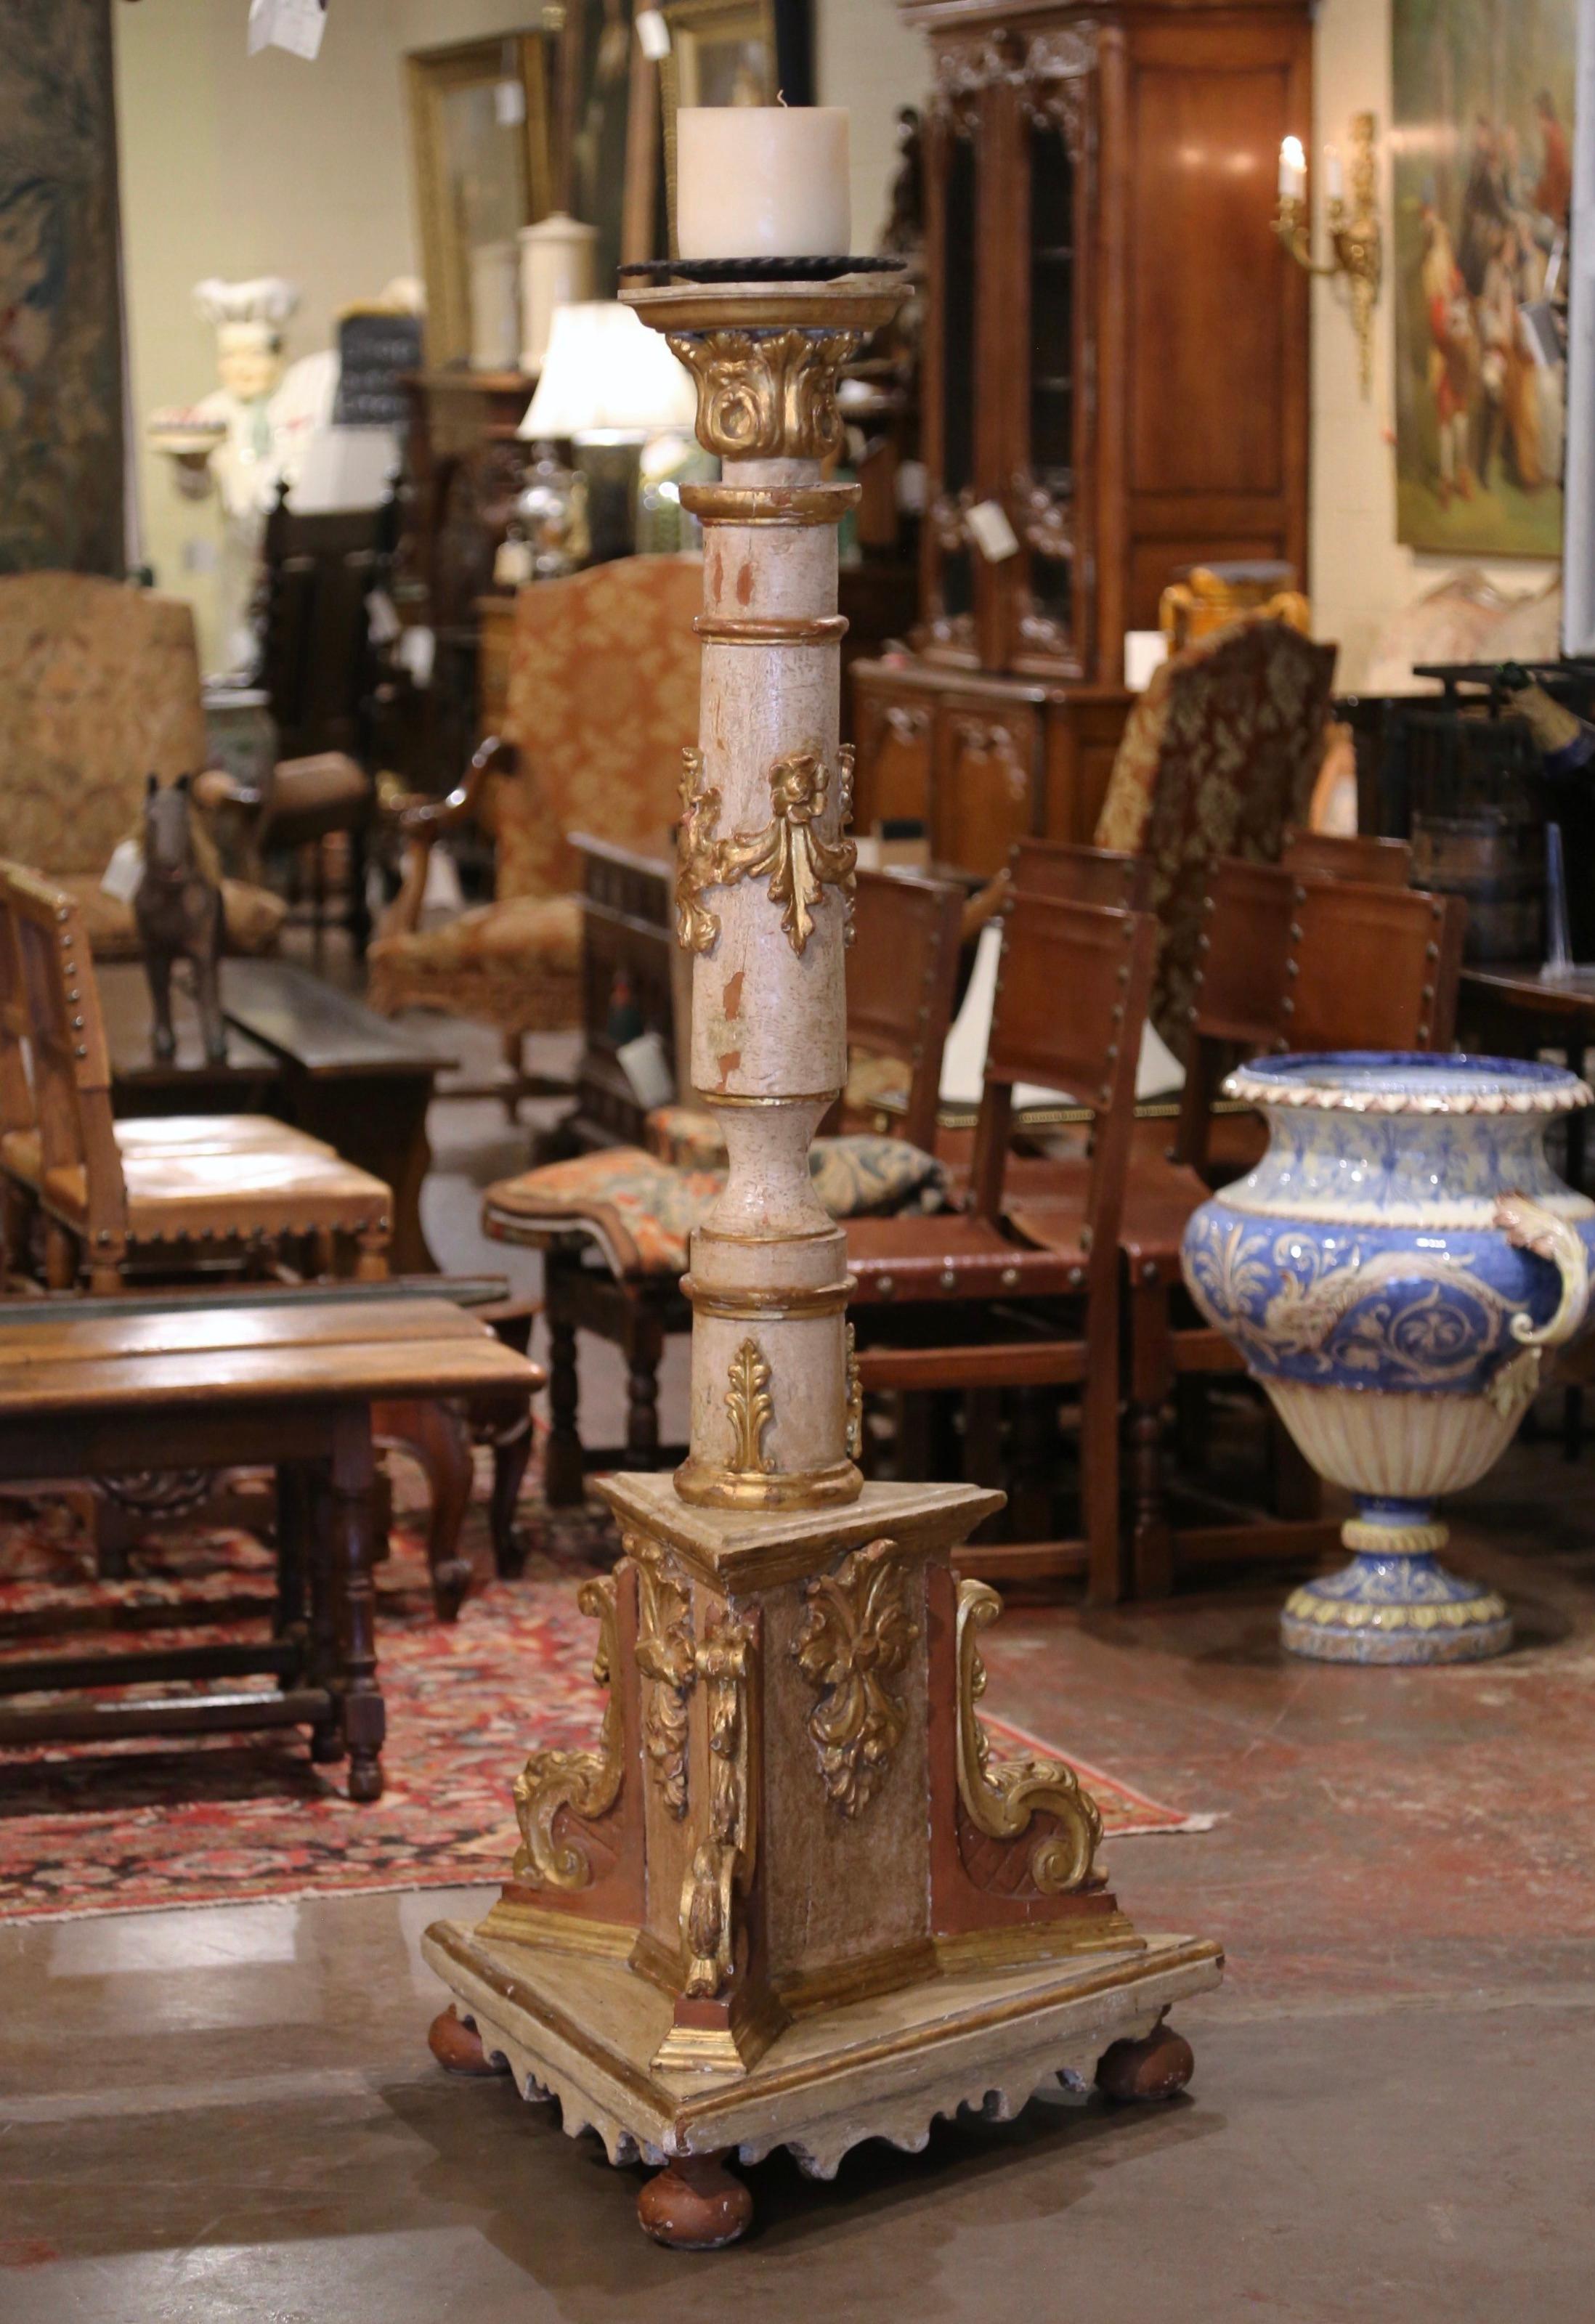 Standing at 6 feet tall, this antique torchere was crafted in Italy, circa 1860. The elegant candle holder stands on a wide triangular base ending with bun feet over a tripod bottom decorated with scroll and shell motifs in high relief. The large